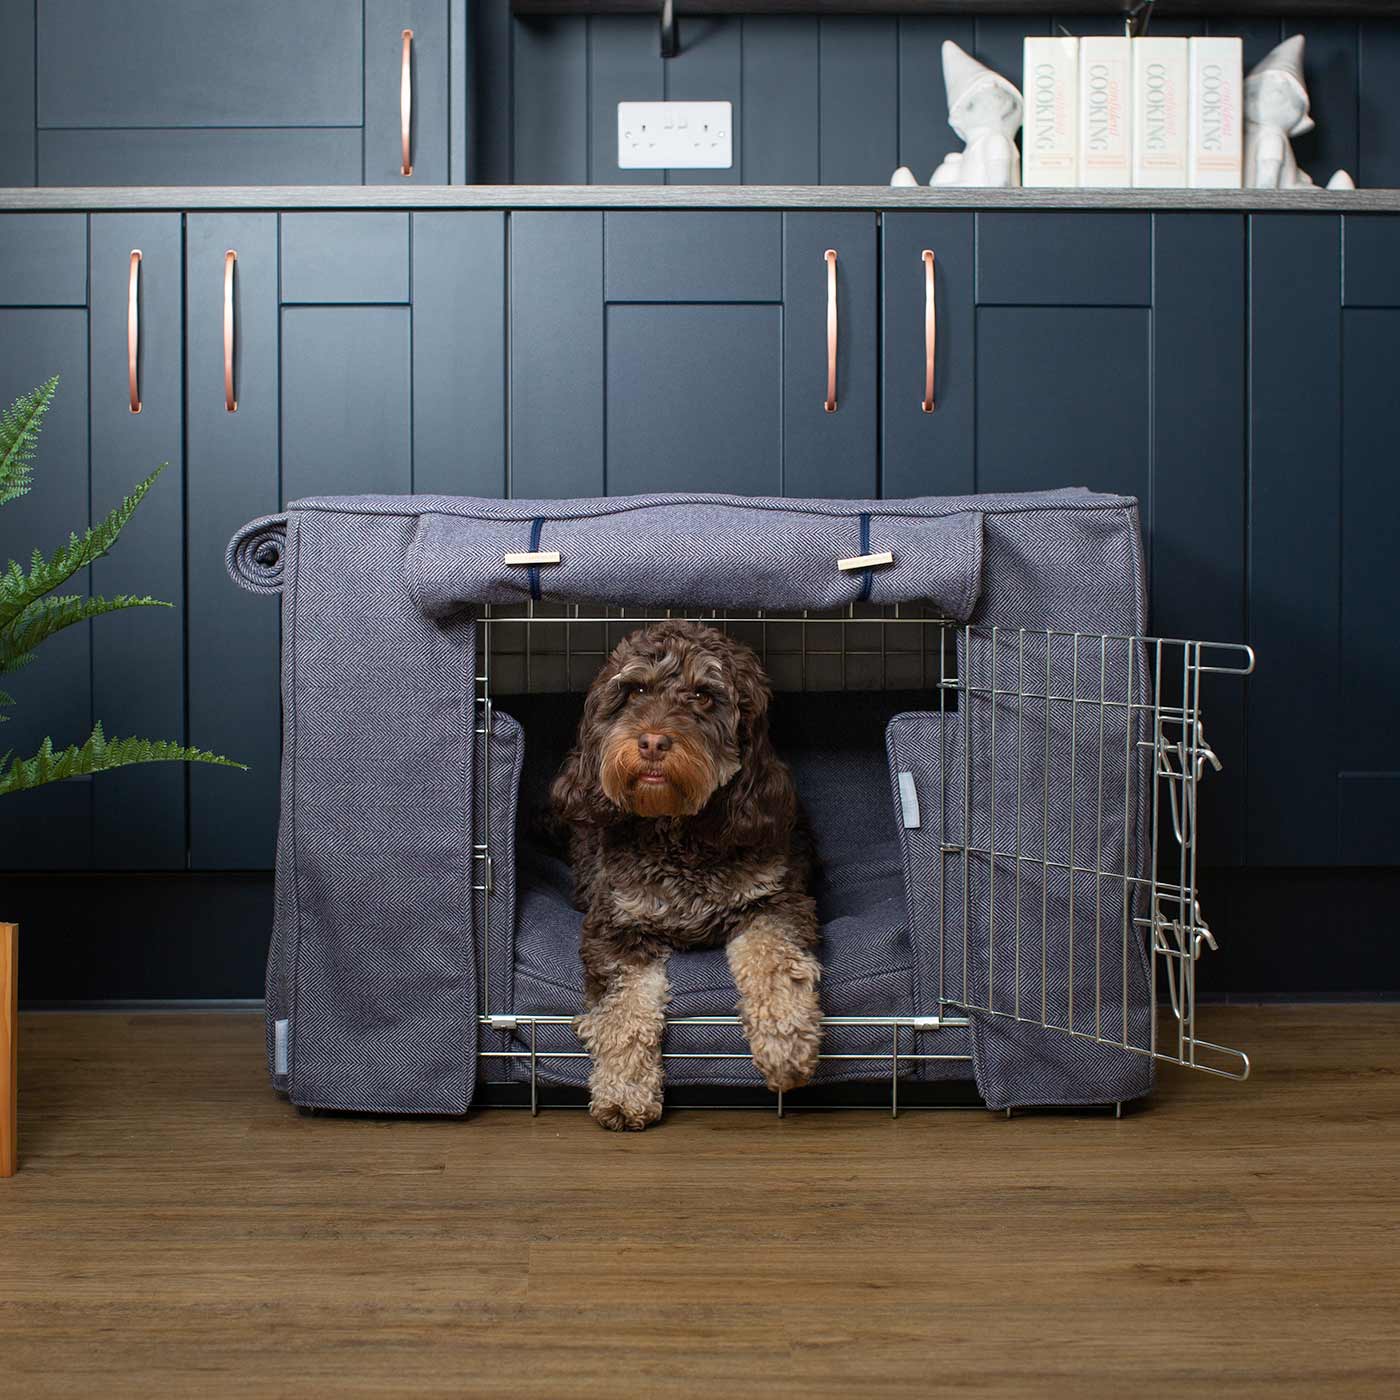 Luxury Heavy Duty Dog Cage, In Stunning Oxford Herringbone Tweed Cage Set, The Perfect Dog Cage Set For Building The Ultimate Pet Den! Dog Cage Cover Available To Personalize at Lords & Labradors US